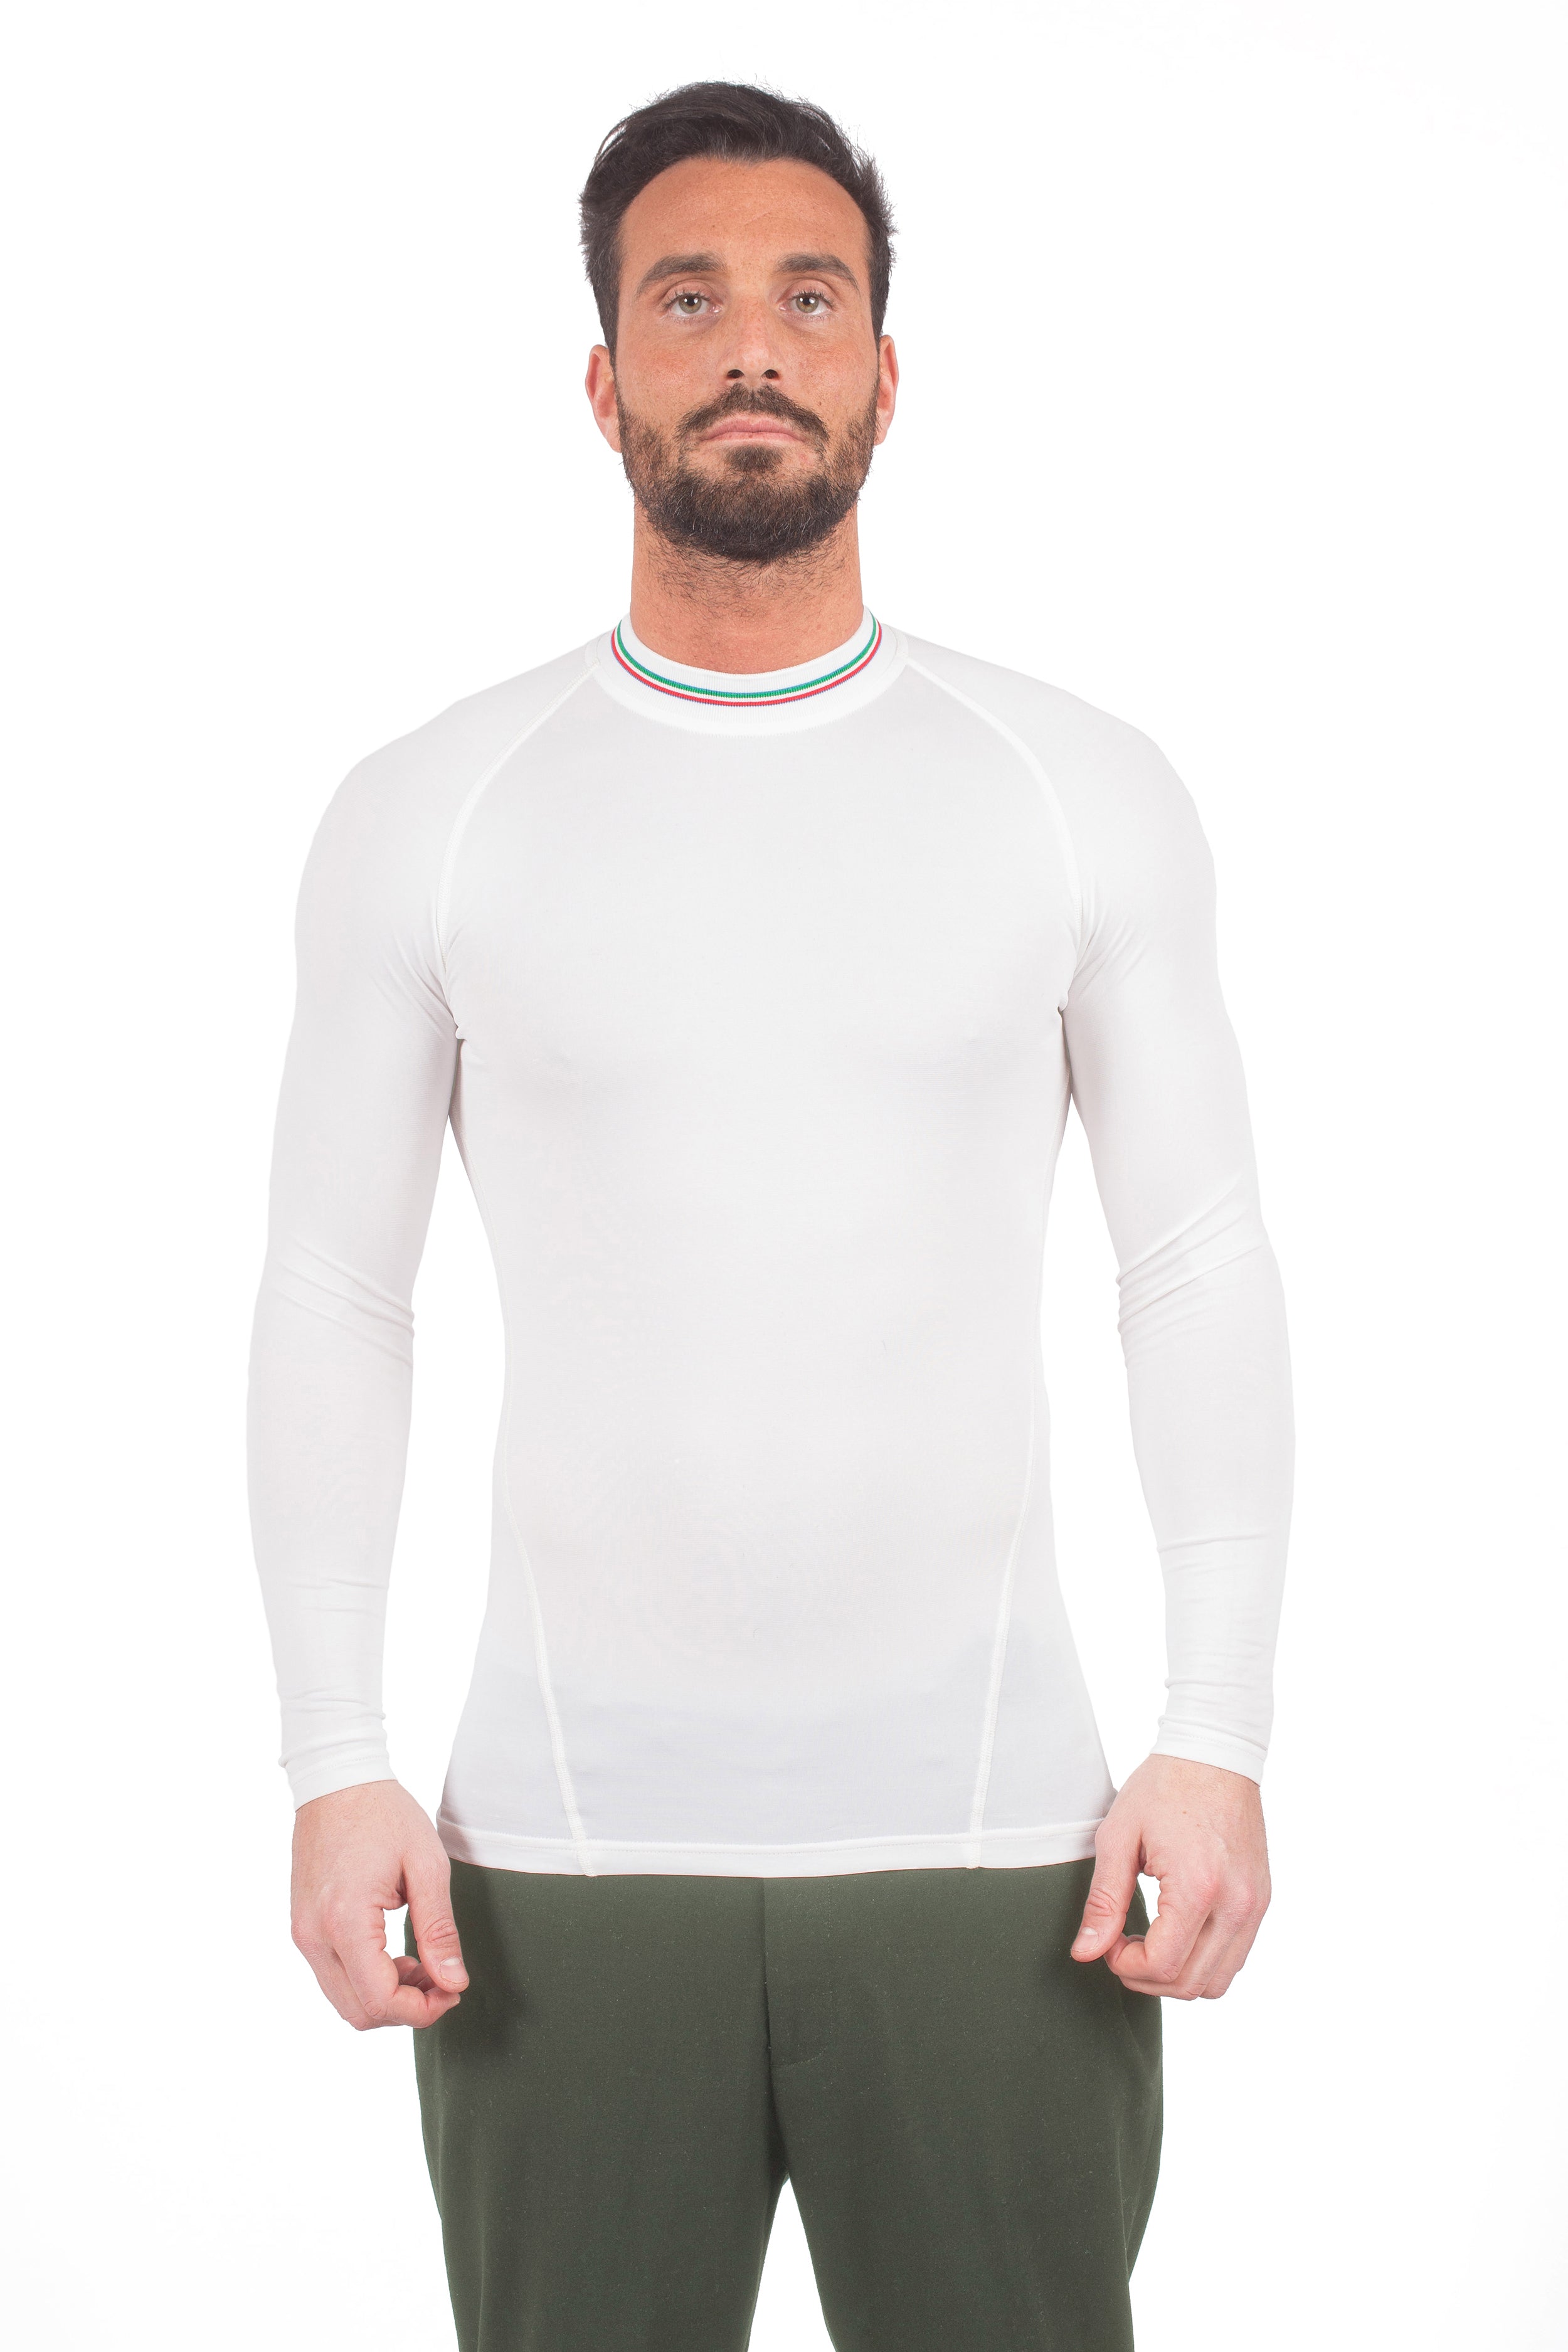 Italian Air Force FIREPROOF THERMAL SHIRT white